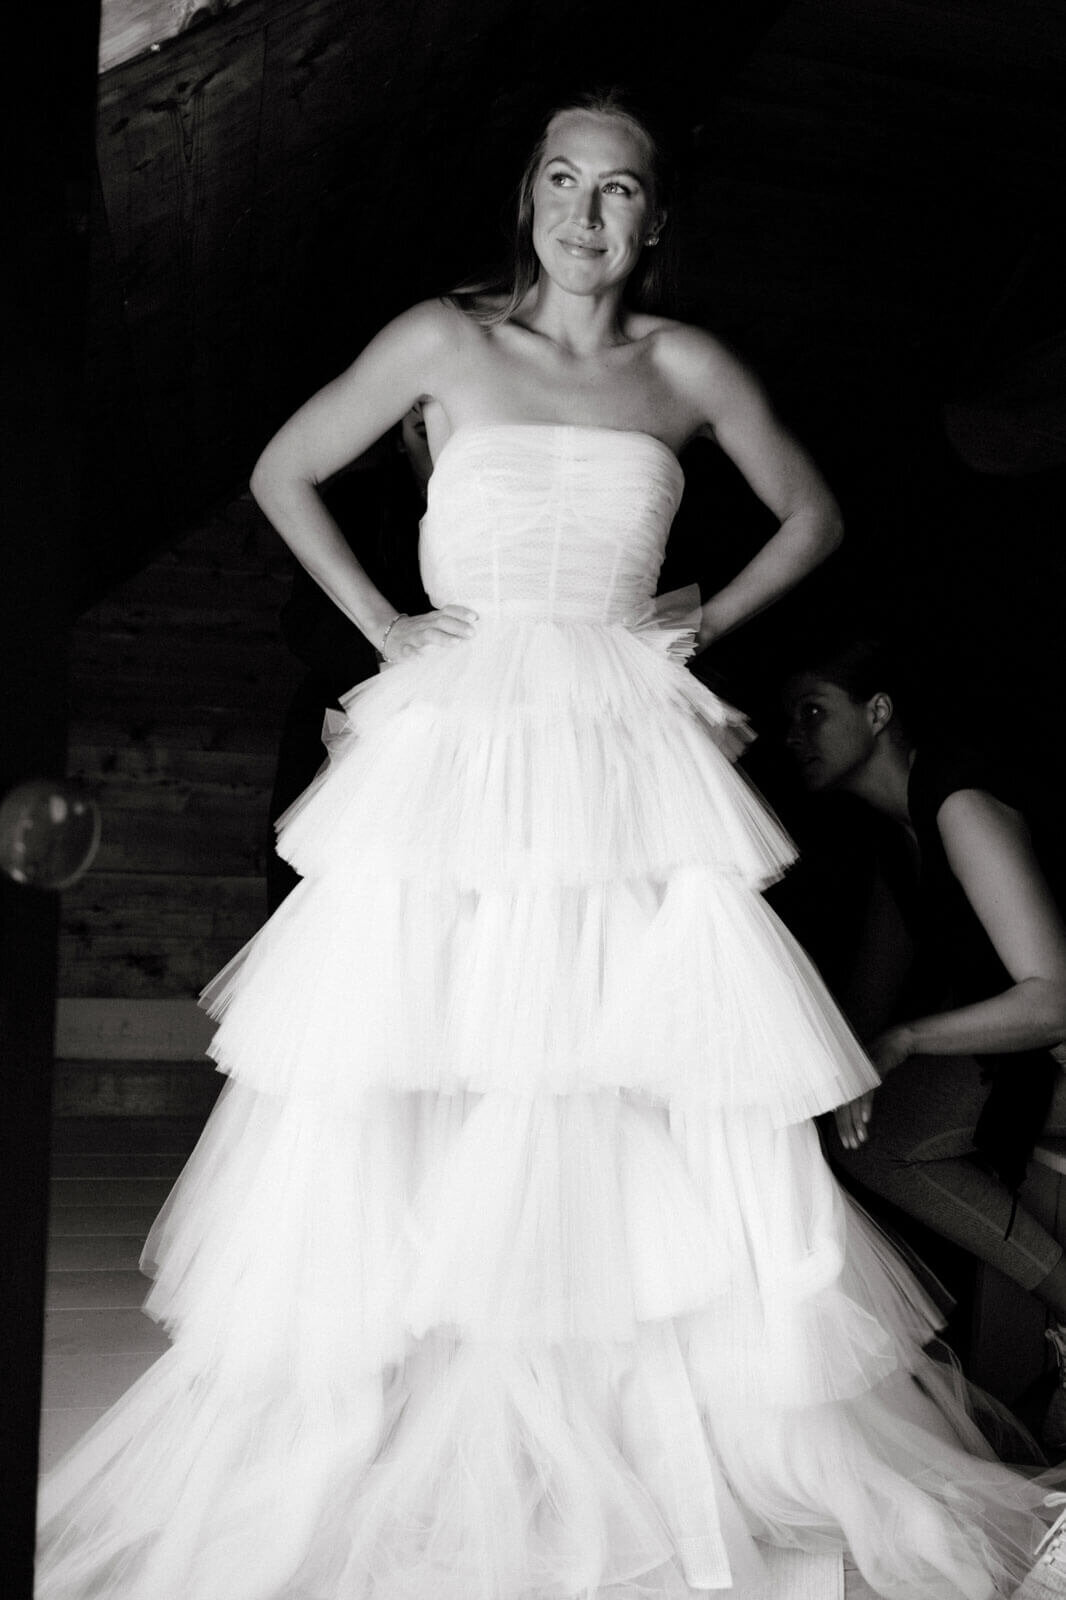 Black and white photo of the bride wearing her wedding dress at The Ausable Club, New York.